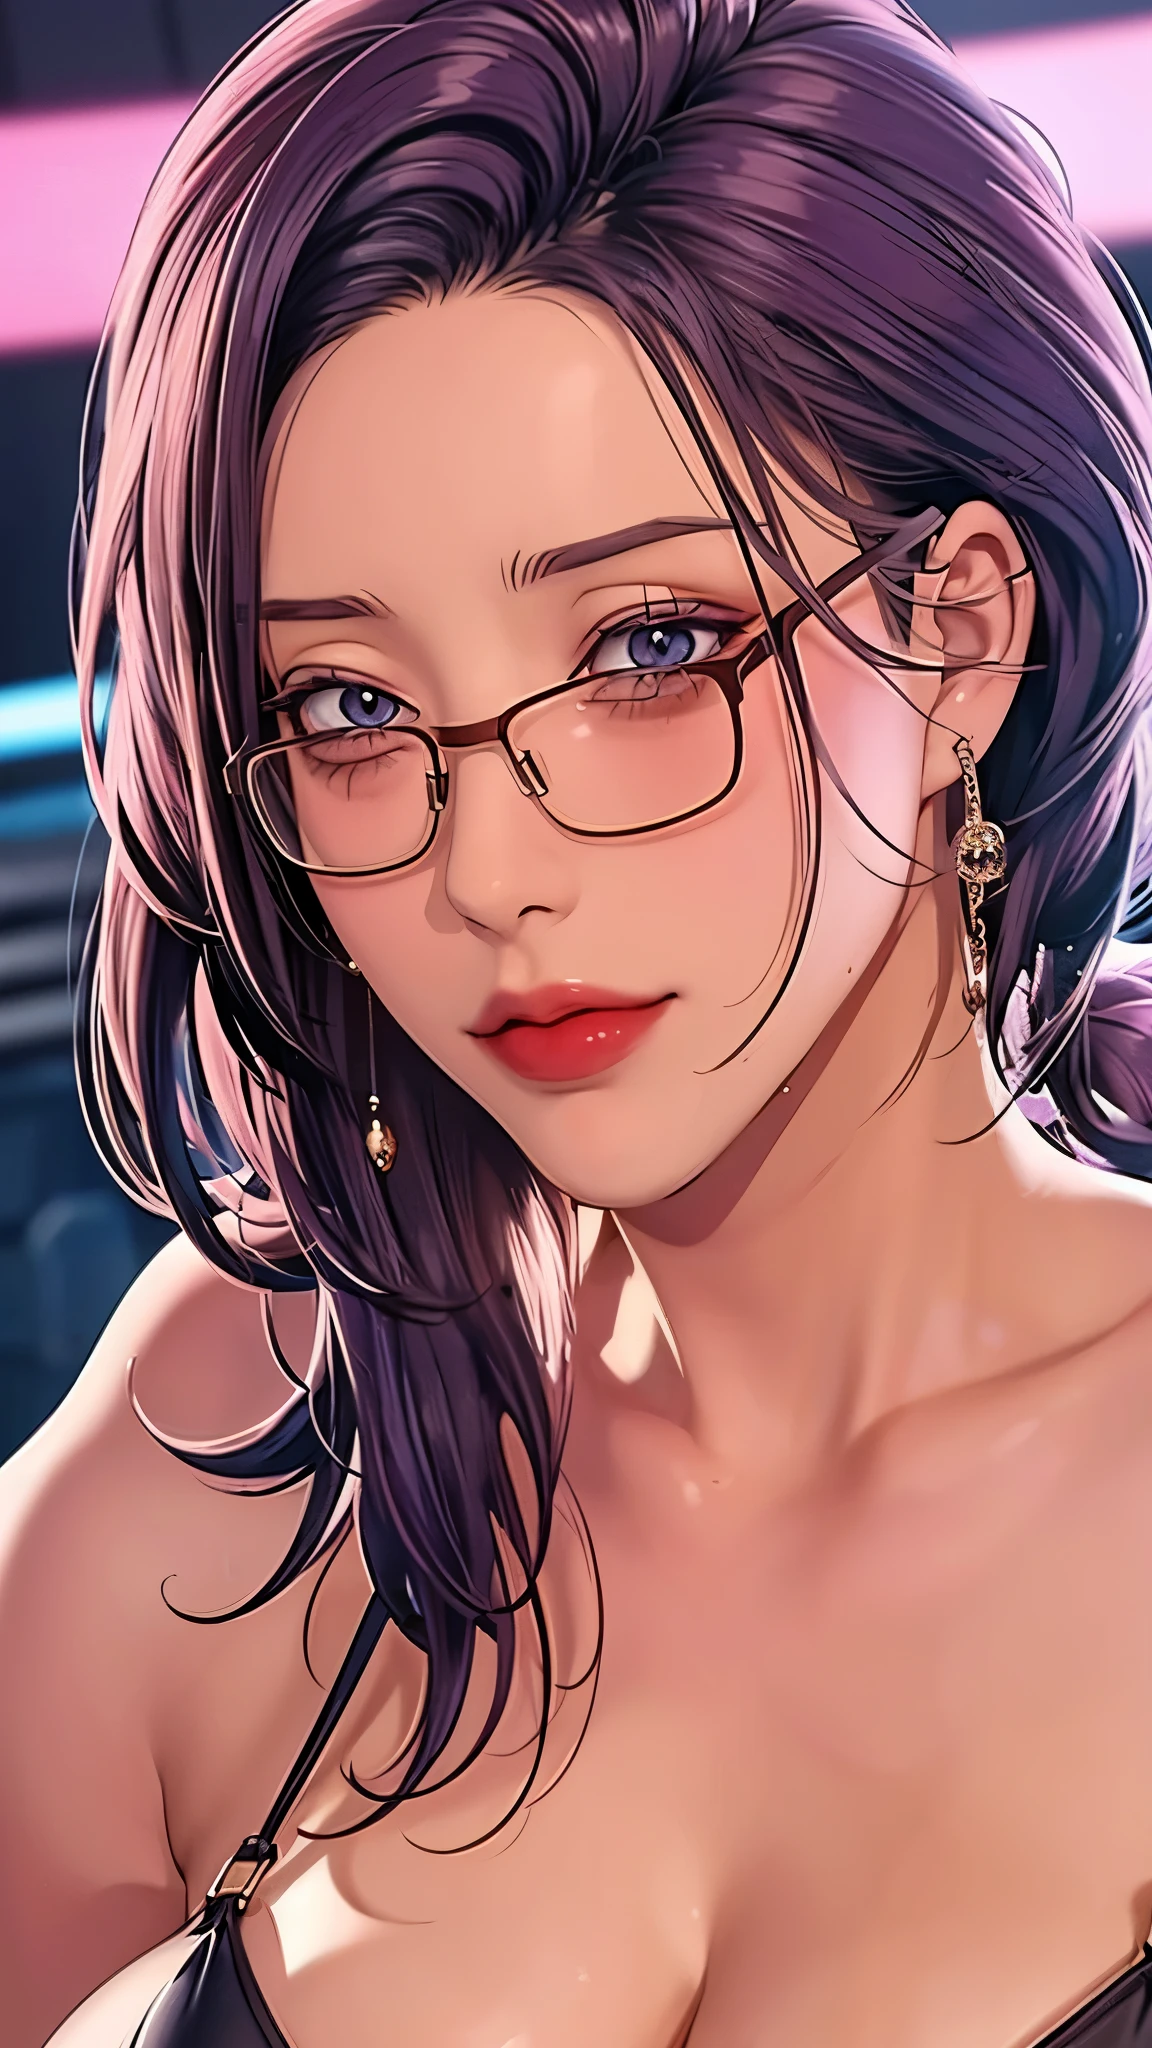 （（（Perfect figure，figure， （（（JMT,Glasses,purple hair,short hair,purple eyes,）））型figure:1.7））），((masterpiece)),high resolution, ((Best quality at best))，masterpiece，quality，Best quality，（（（ Exquisite facial features，looking at the audience,There is light in the eyes，Happy，nterlacing of light and shadow，huge boobs））），（（（looking into camera，)）））